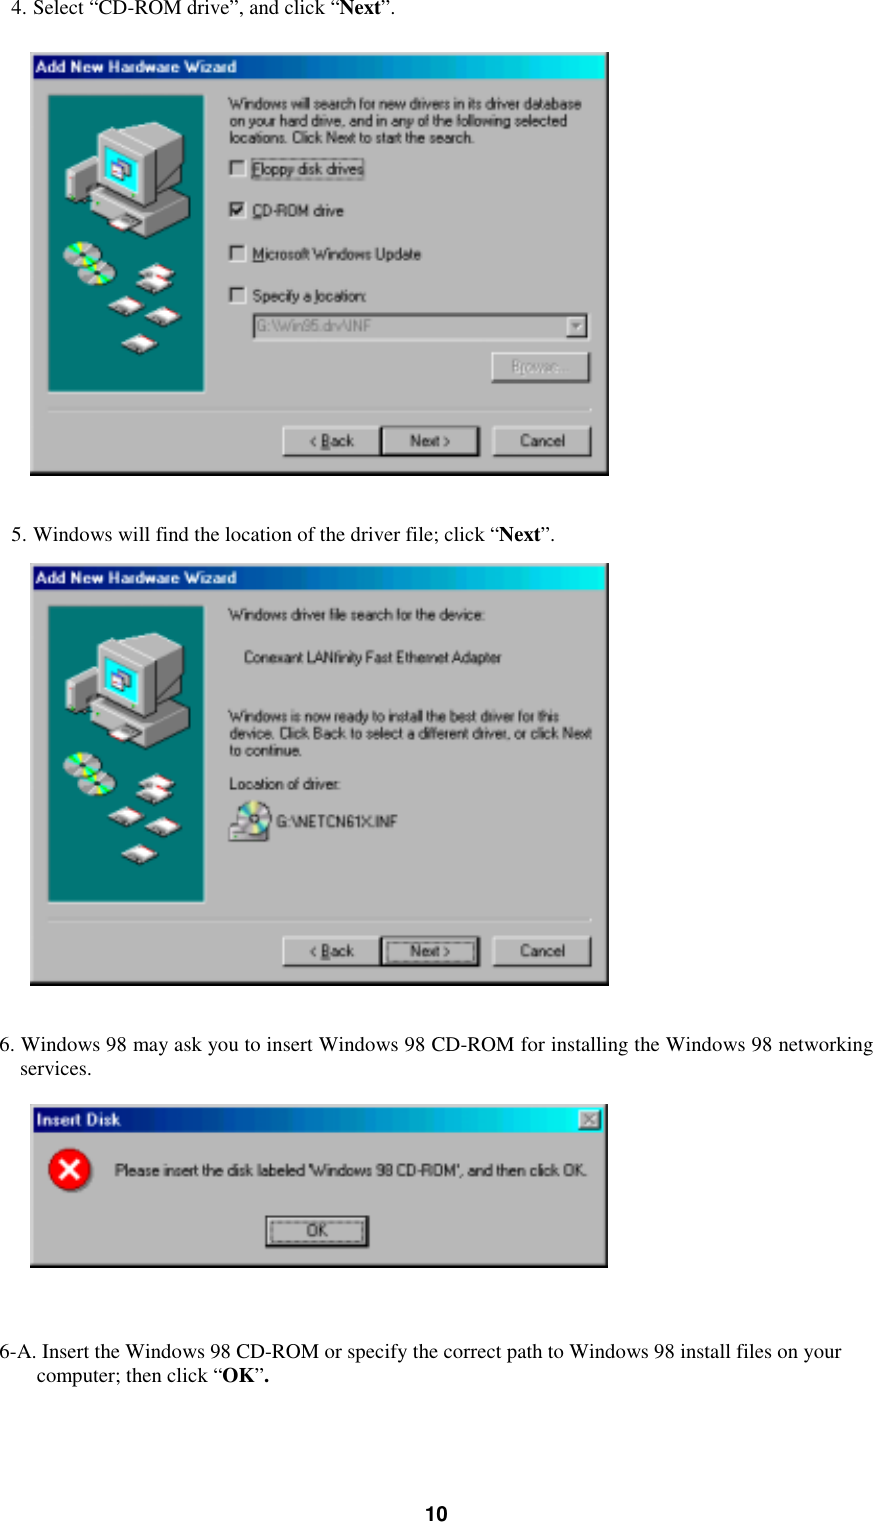 104. Select “CD-ROM drive”, and click “Next”.5. Windows will find the location of the driver file; click “Next”.6. Windows 98 may ask you to insert Windows 98 CD-ROM for installing the Windows 98 networkingservices.    6-A. Insert the Windows 98 CD-ROM or specify the correct path to Windows 98 install files on yourcomputer; then click “OK”.